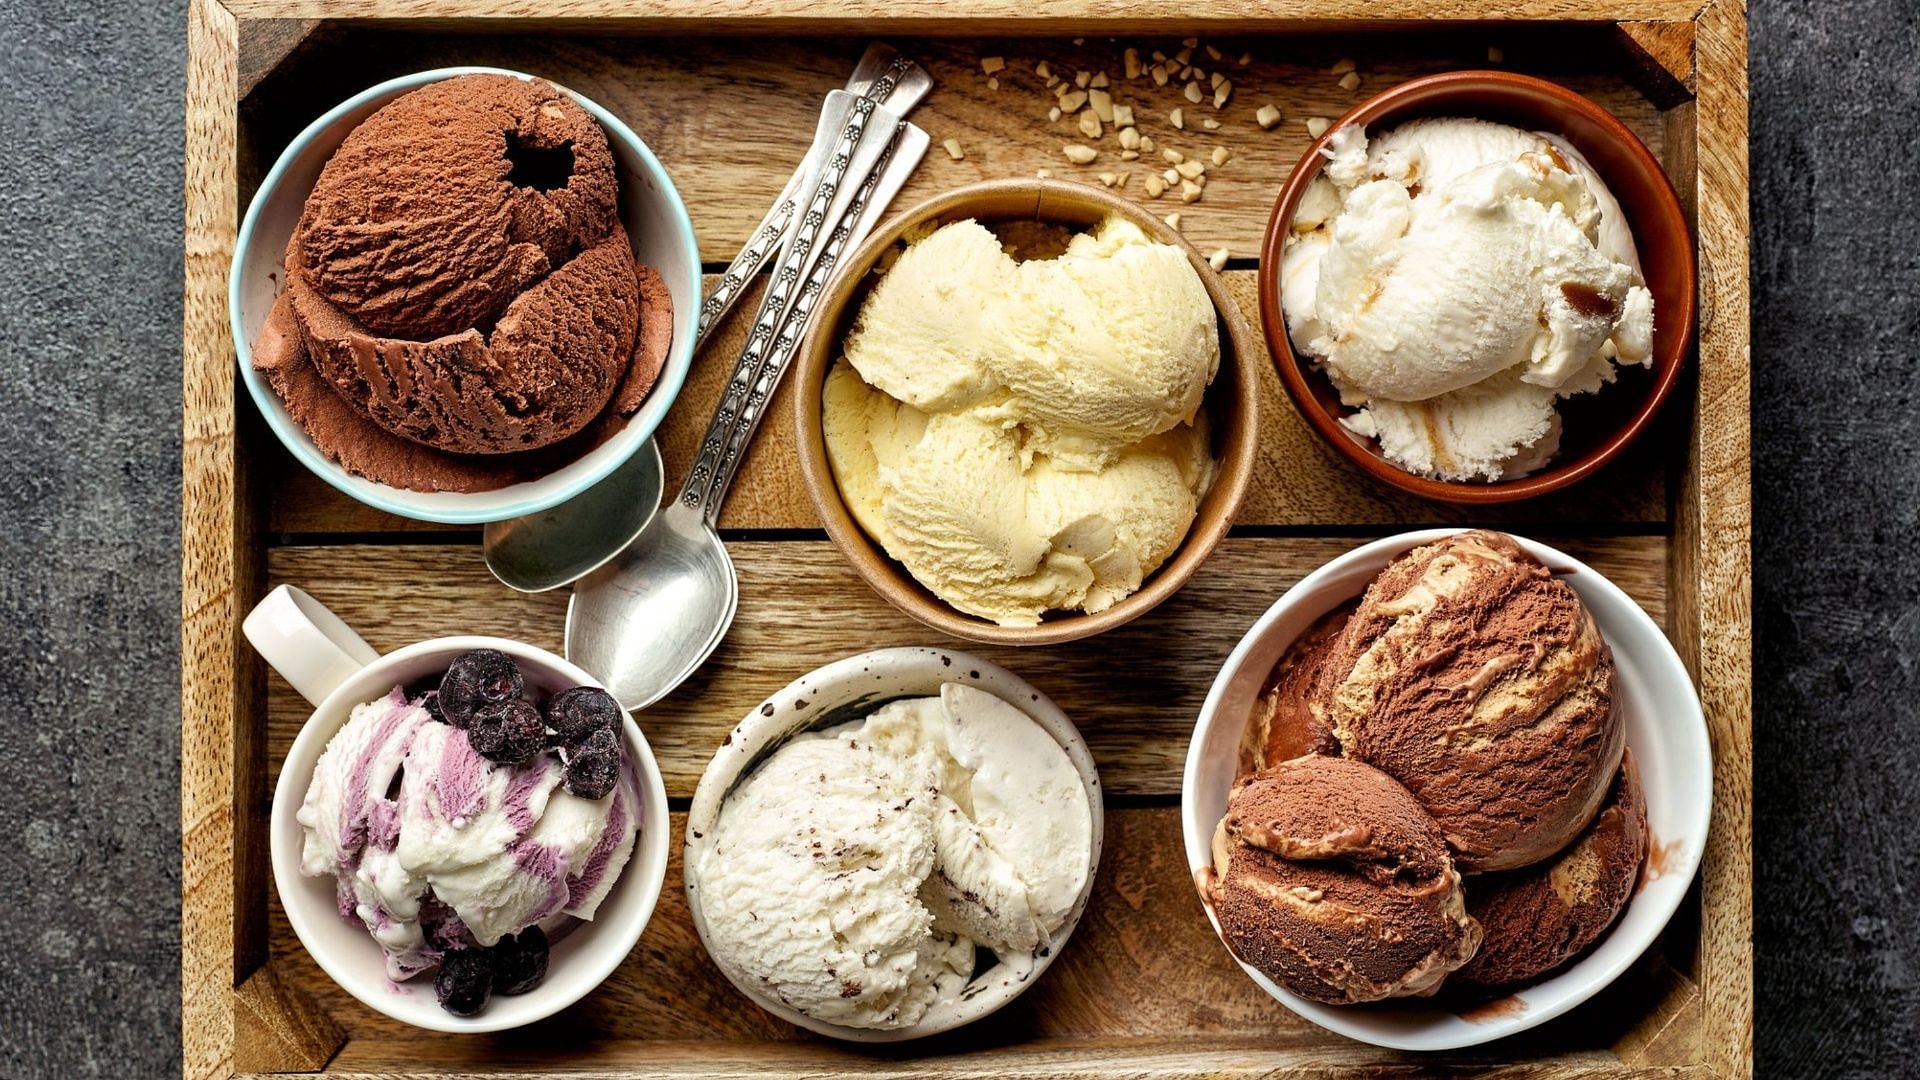 Enjoy decadent sweet scoops of ice creams this July 16 as America celebrates National Ice Cream Day (Image via Magone / Getty Images)